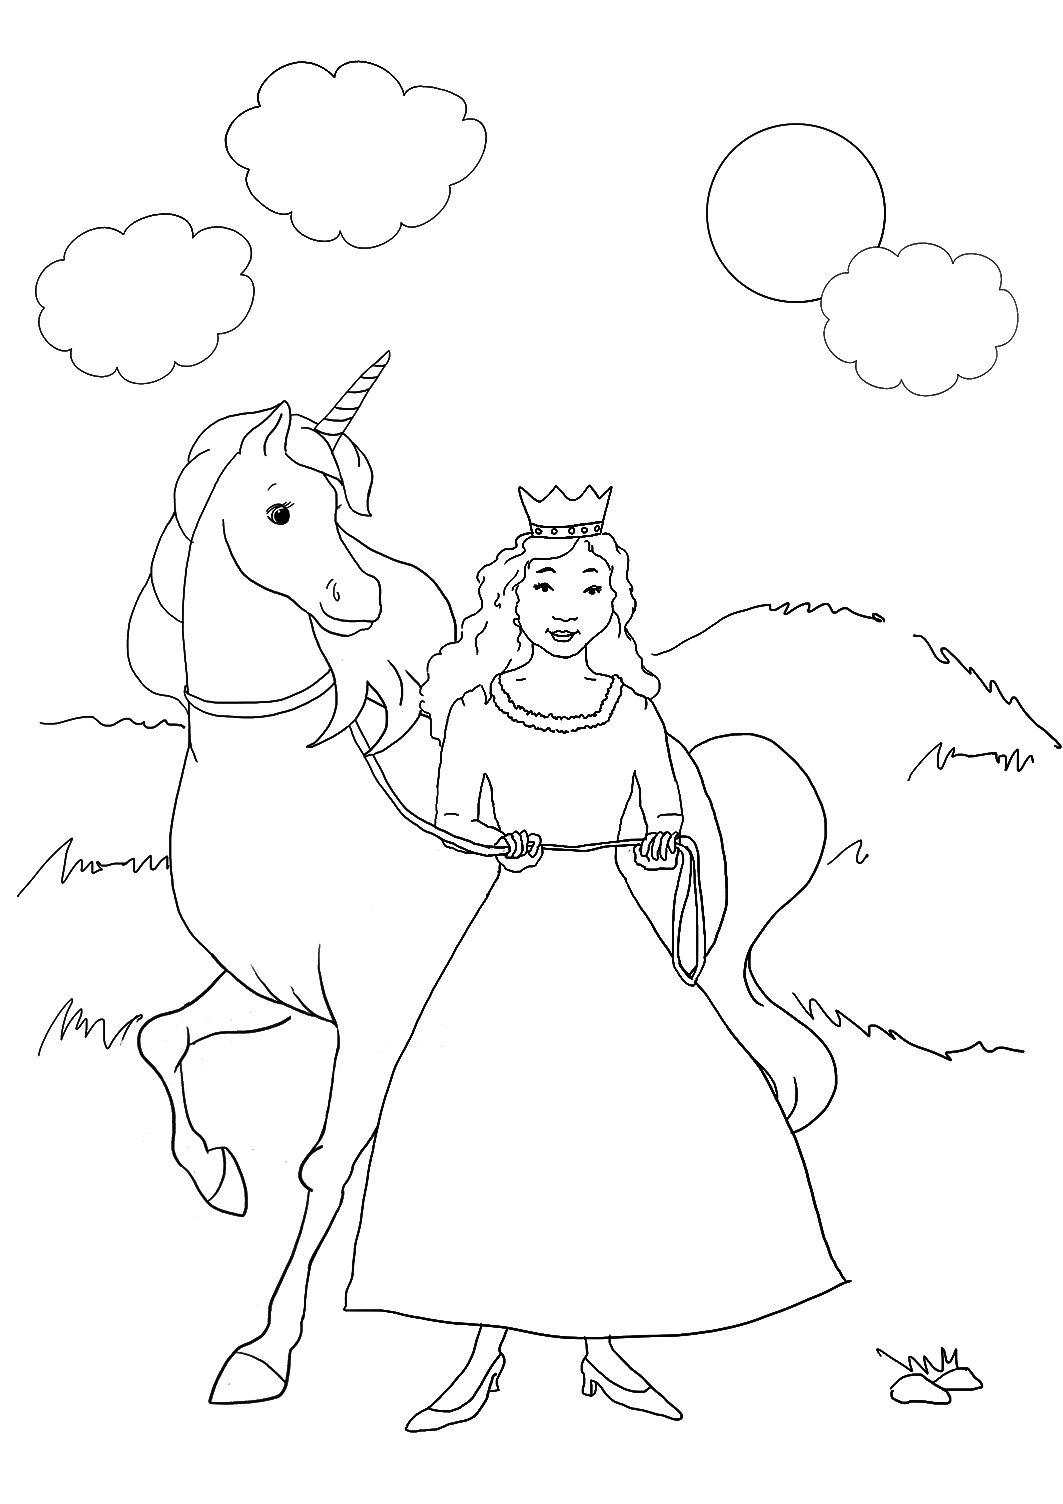 Princess Unicorn Coloring Pages For Kids : Unicorn whale soft toy